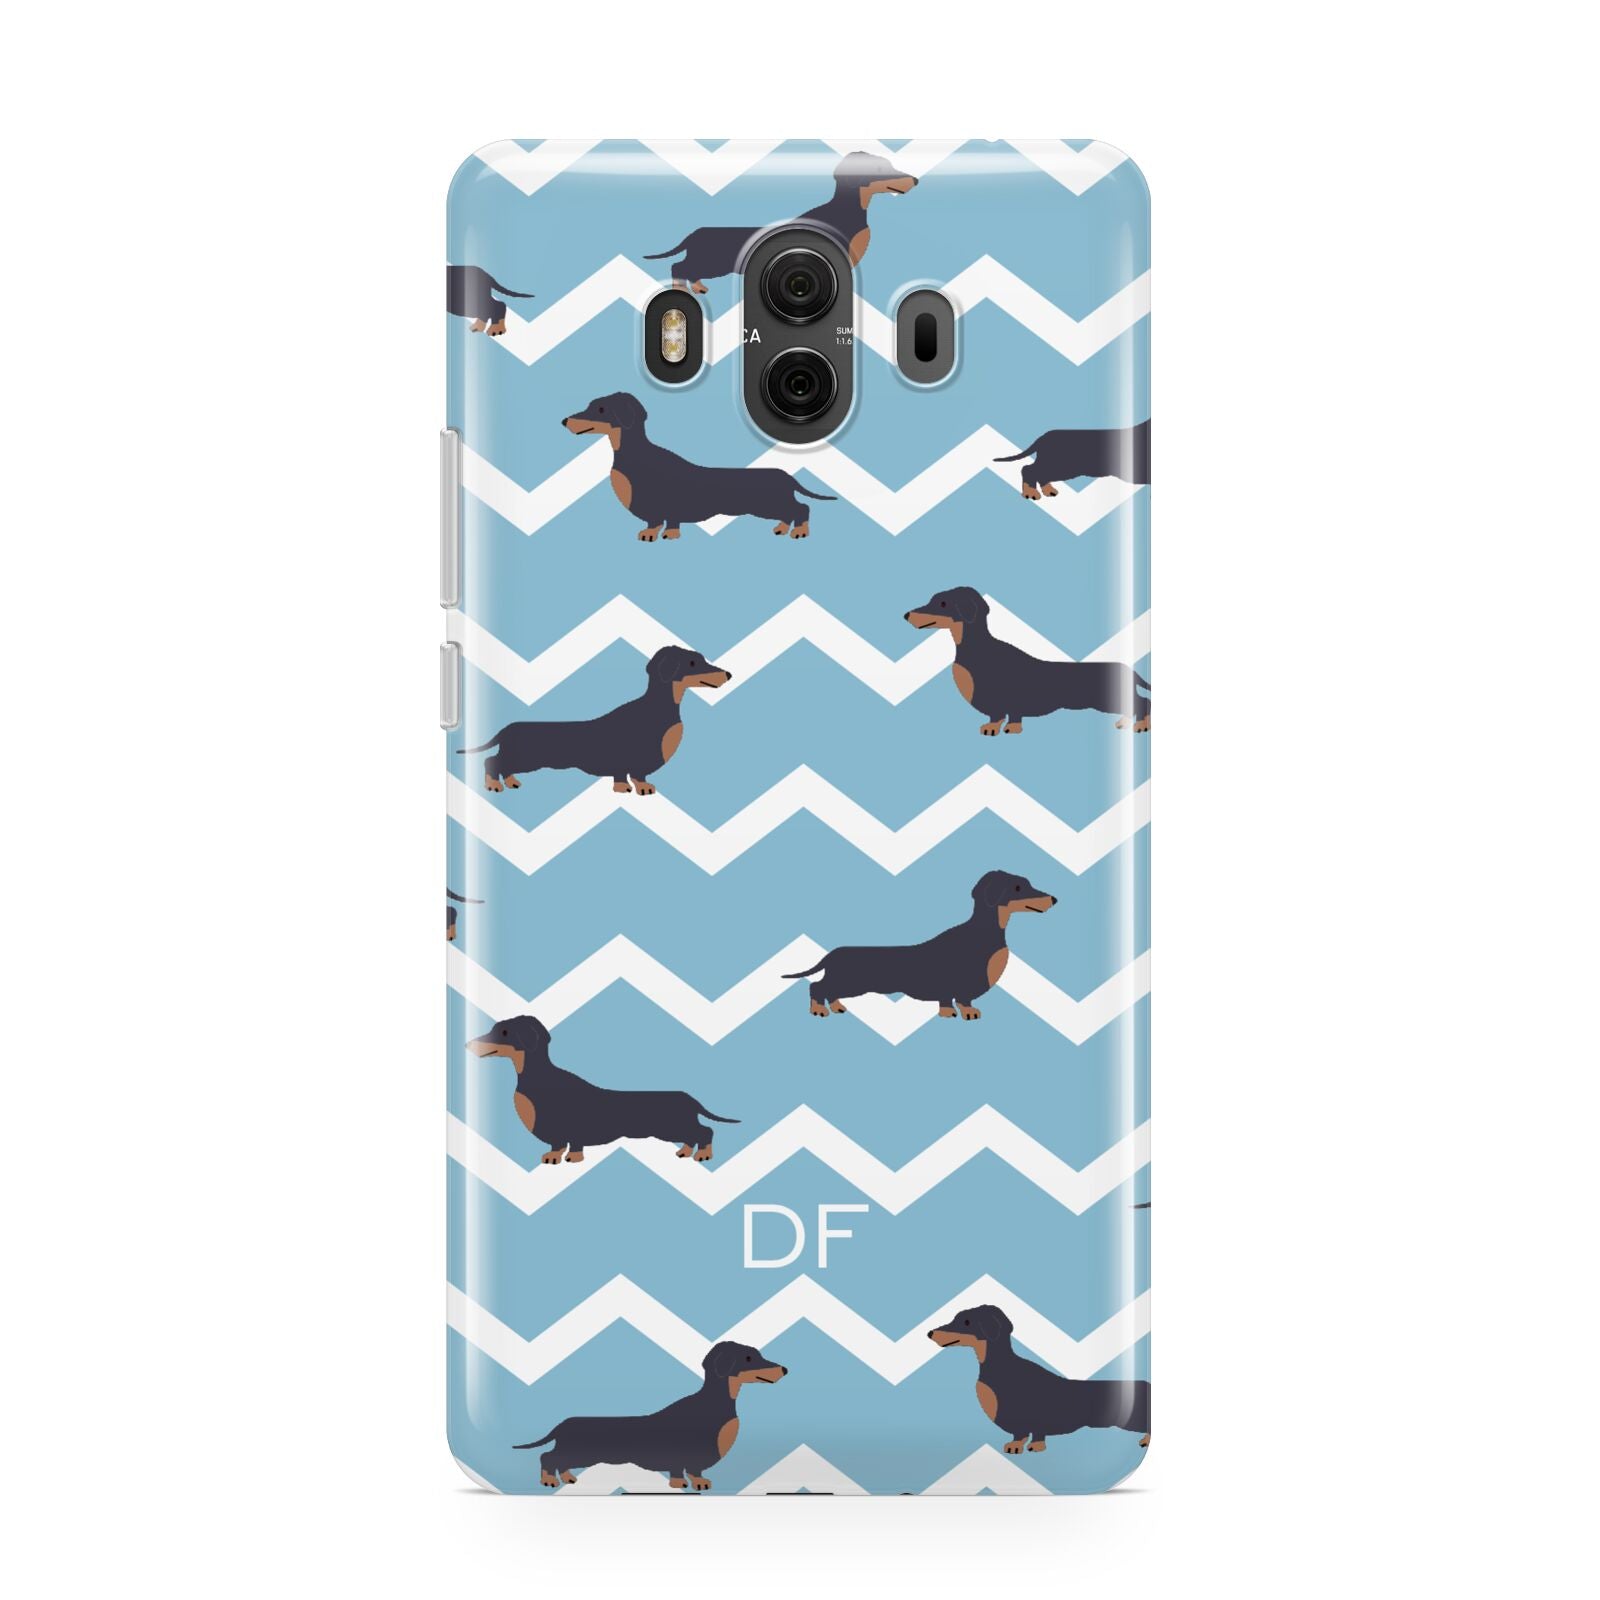 Personalised Dachshund Huawei Mate 10 Protective Phone Case